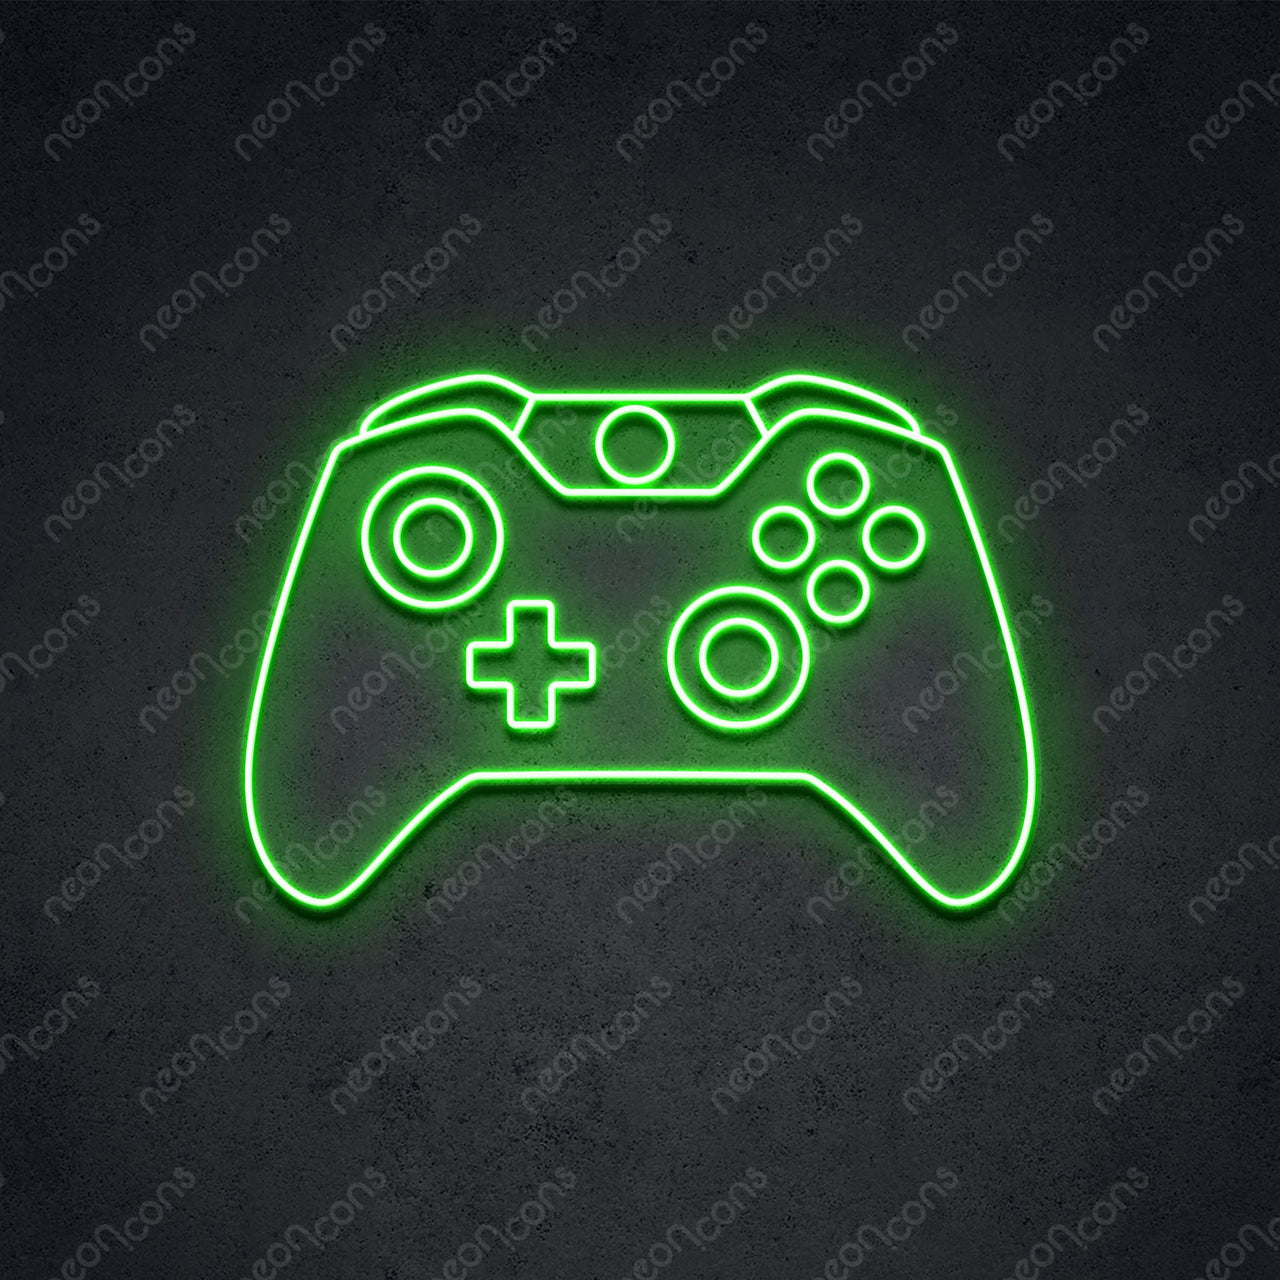 "Xbox Controller" Neon Sign 2ft x 1.40ft / Green / LED Neon by Neon Icons